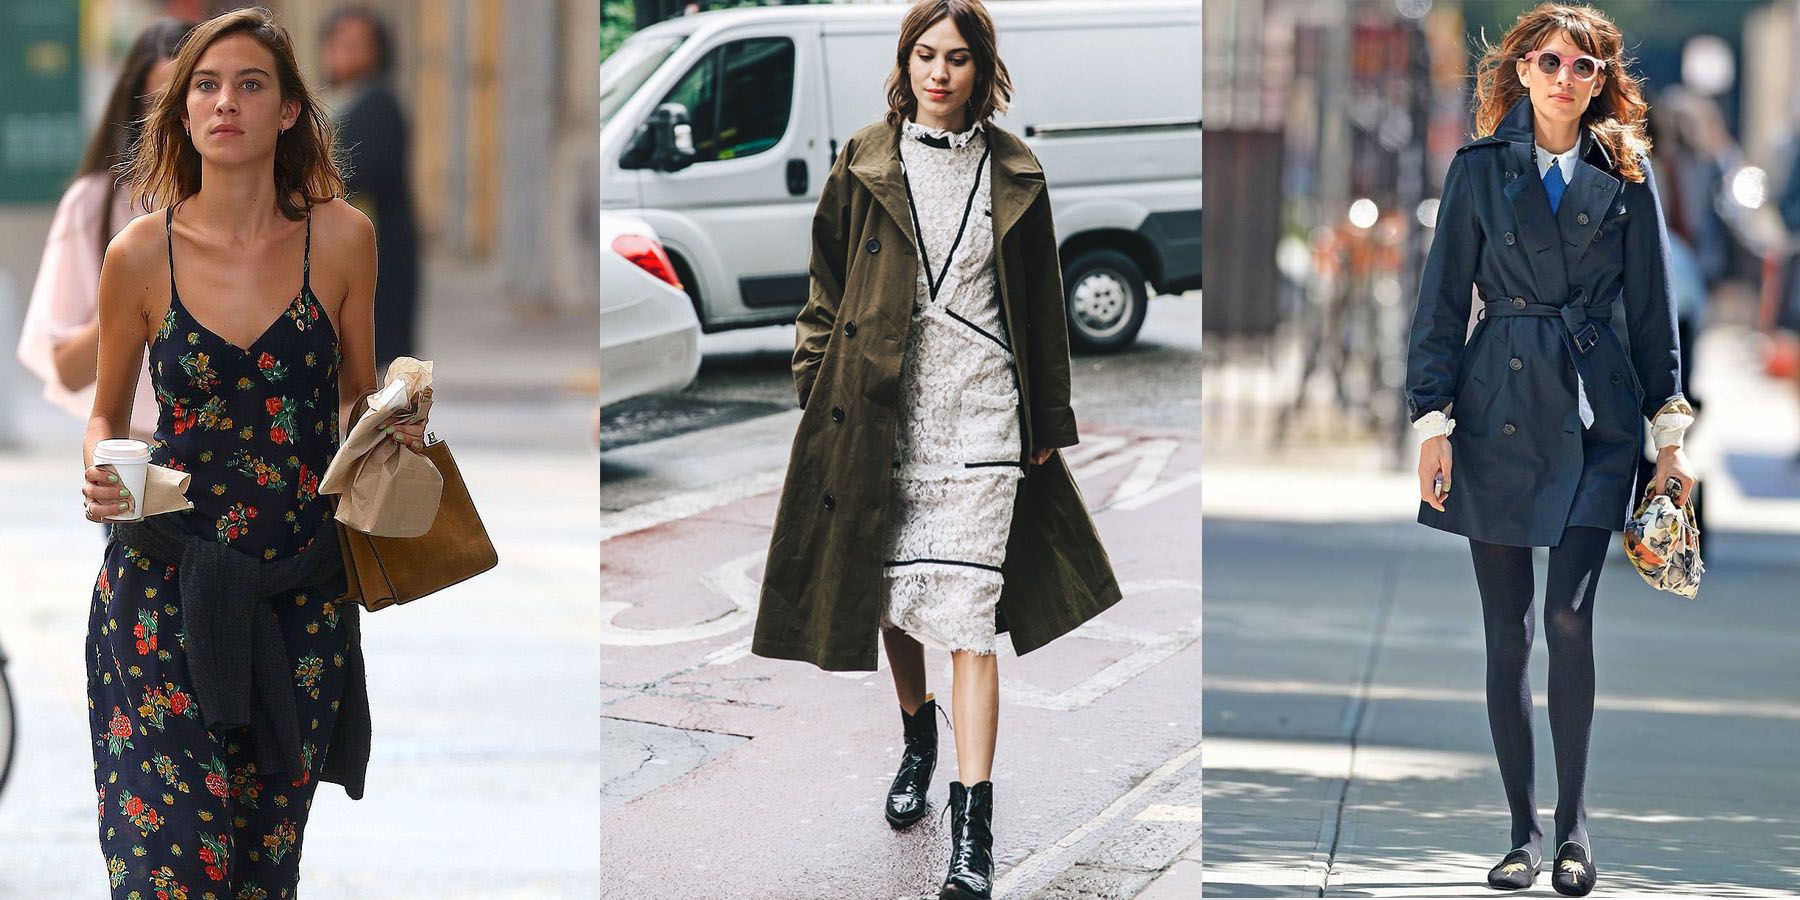 From Casual to Party Look, Here's Alexa Chung's Style Inspiration for Every Occasion